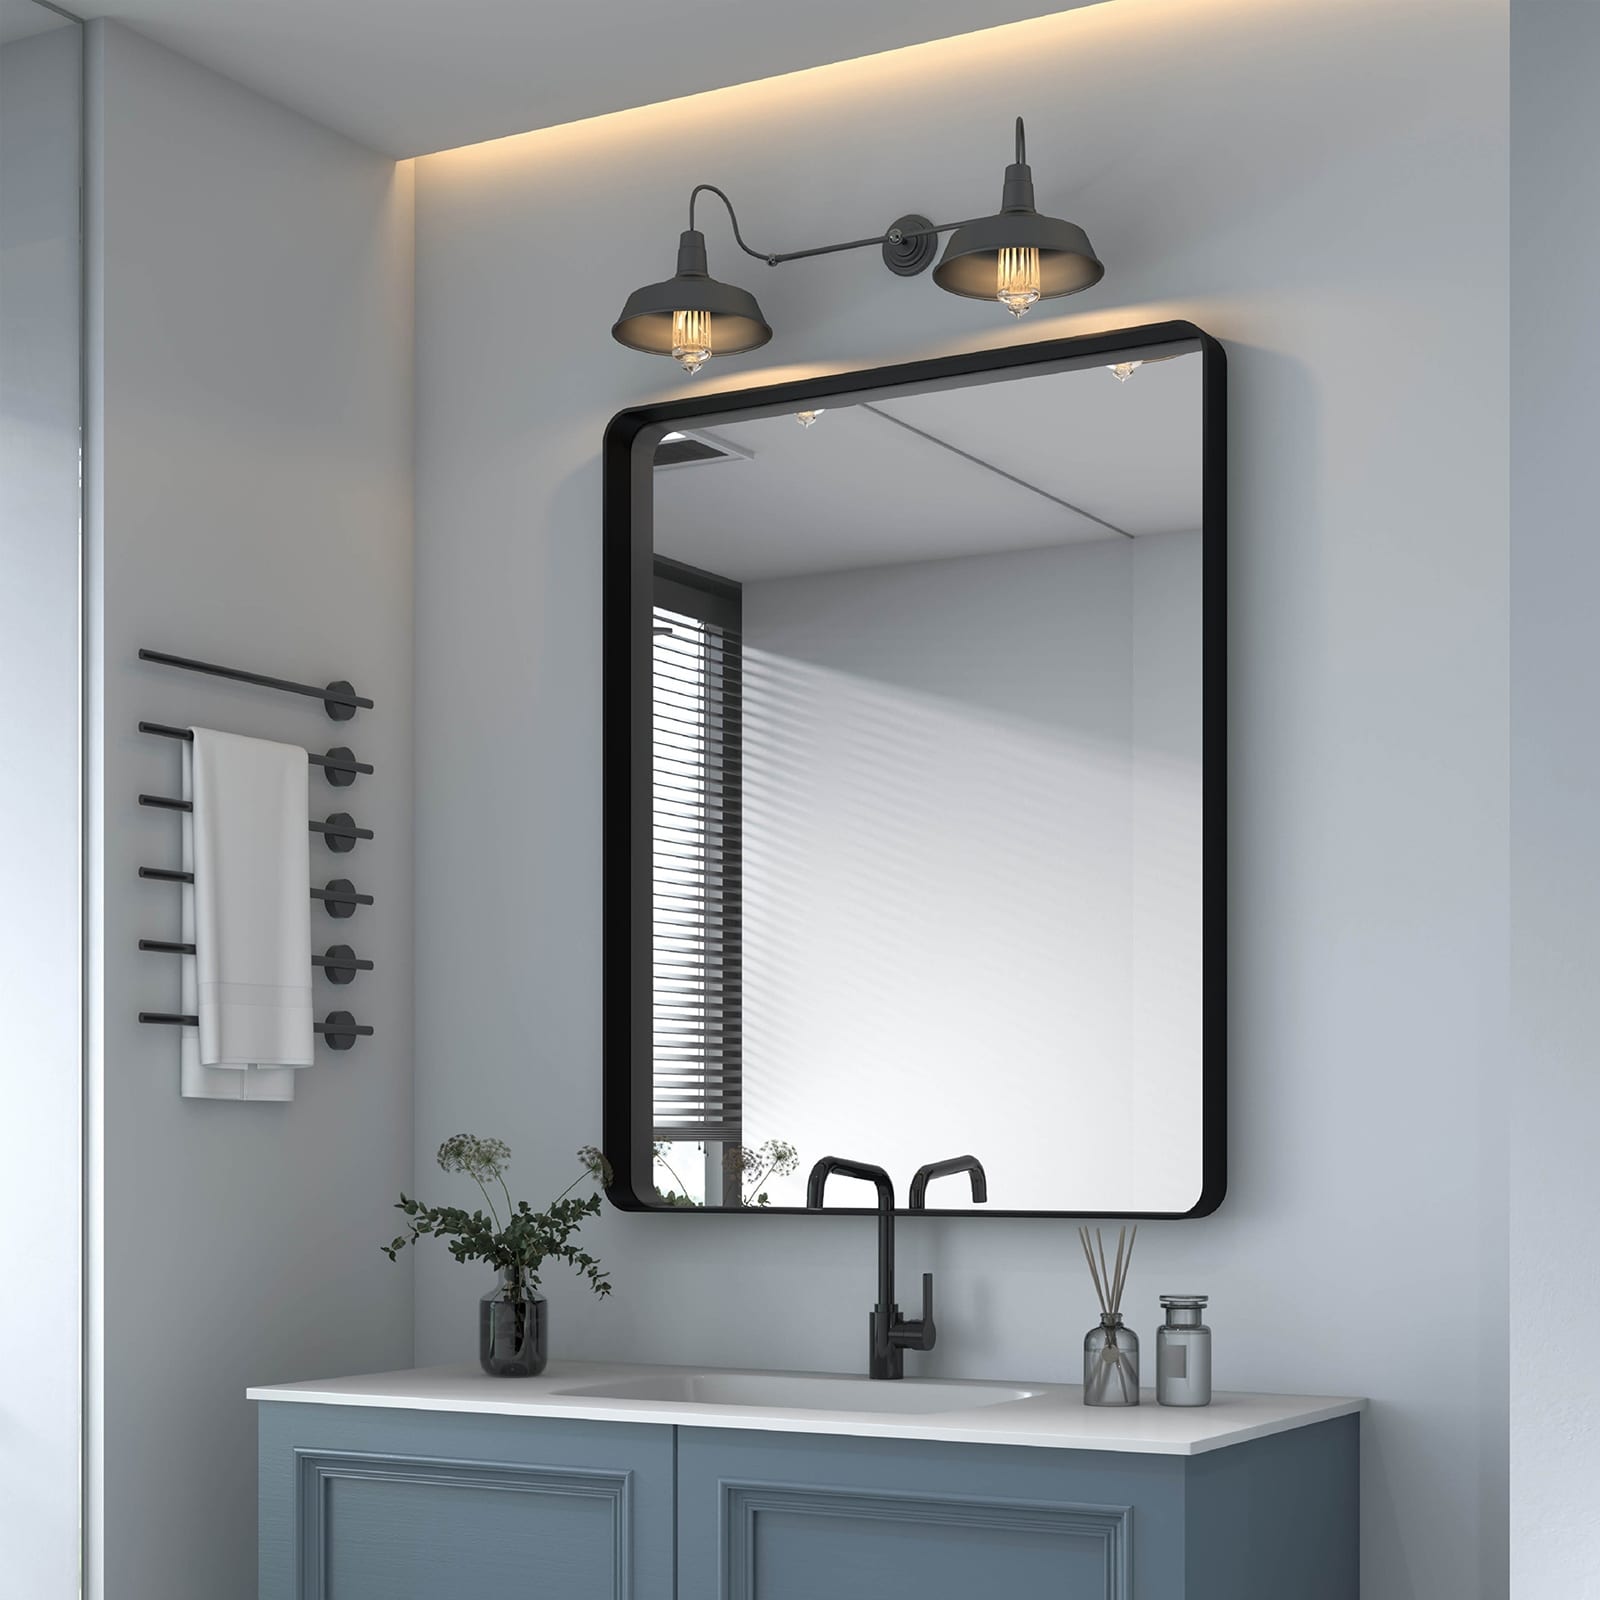 https://ak1.ostkcdn.com/images/products/is/images/direct/534eead0ff22a1cae7c1822e0c47867624d3de15/Toolkiss-Rectangular-Black-Frame-Vanity-Mirror.jpg